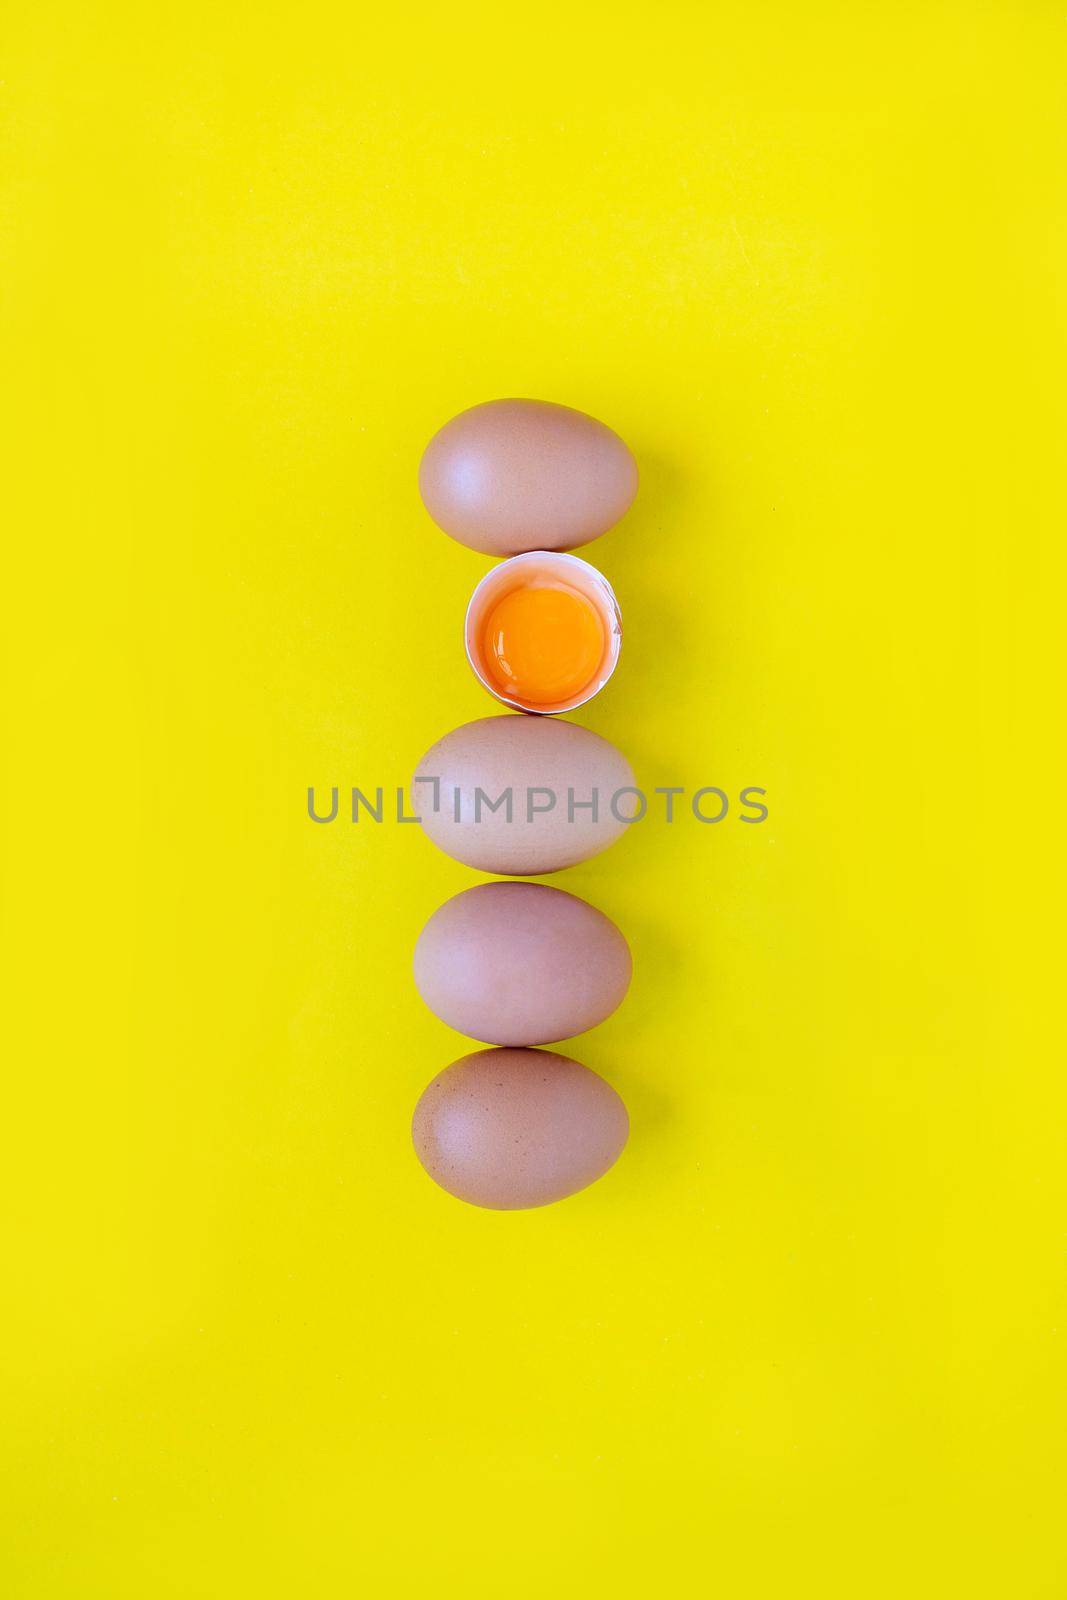 Closeup cracked brown eggs Buy from supermarket Placed side by side on a yellow background